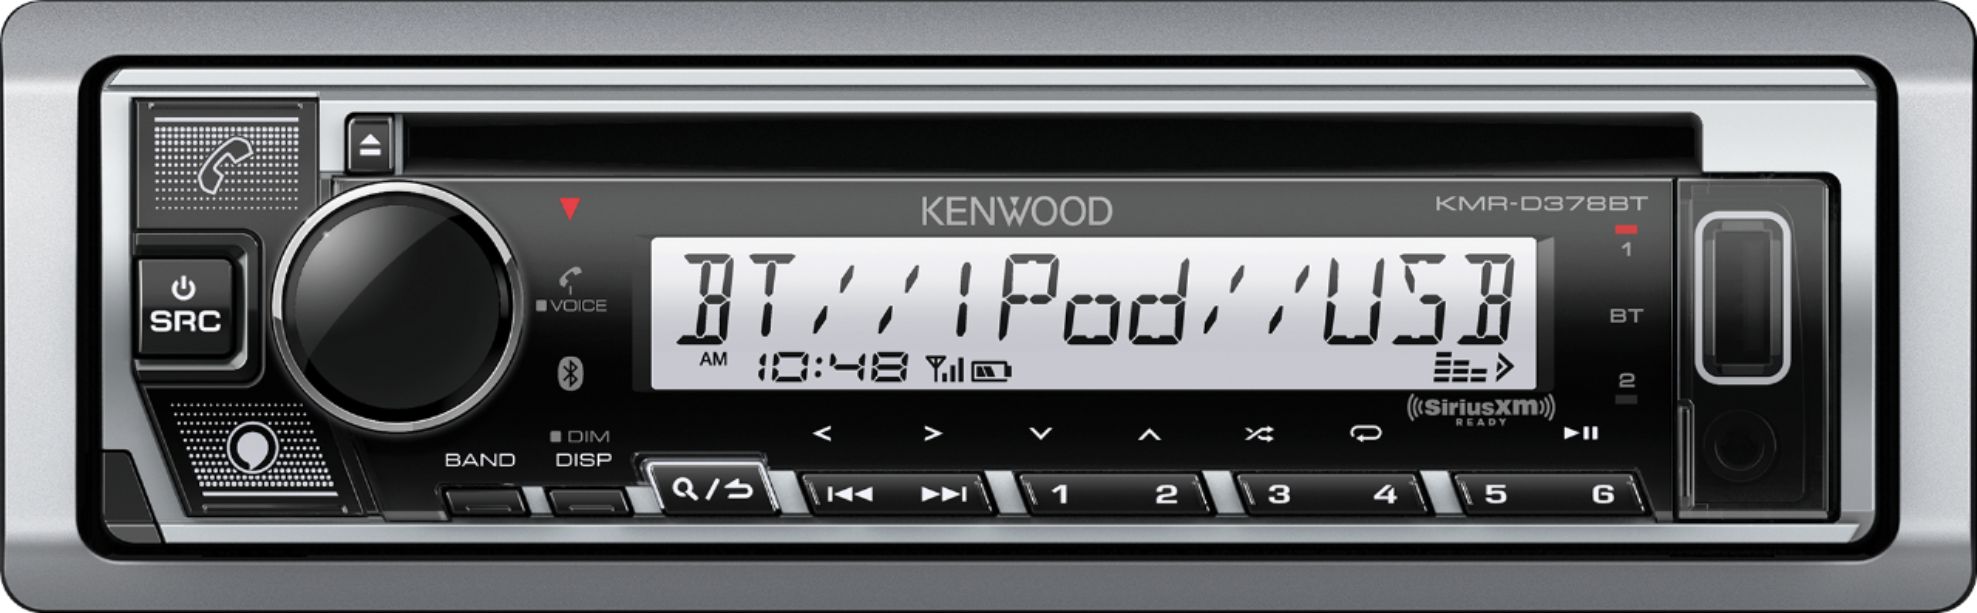 Kenwood - In-Dash CD/DM Receiver - Built-in Bluetooth - Satellite Radio-Ready with Detachable Faceplate - Silver